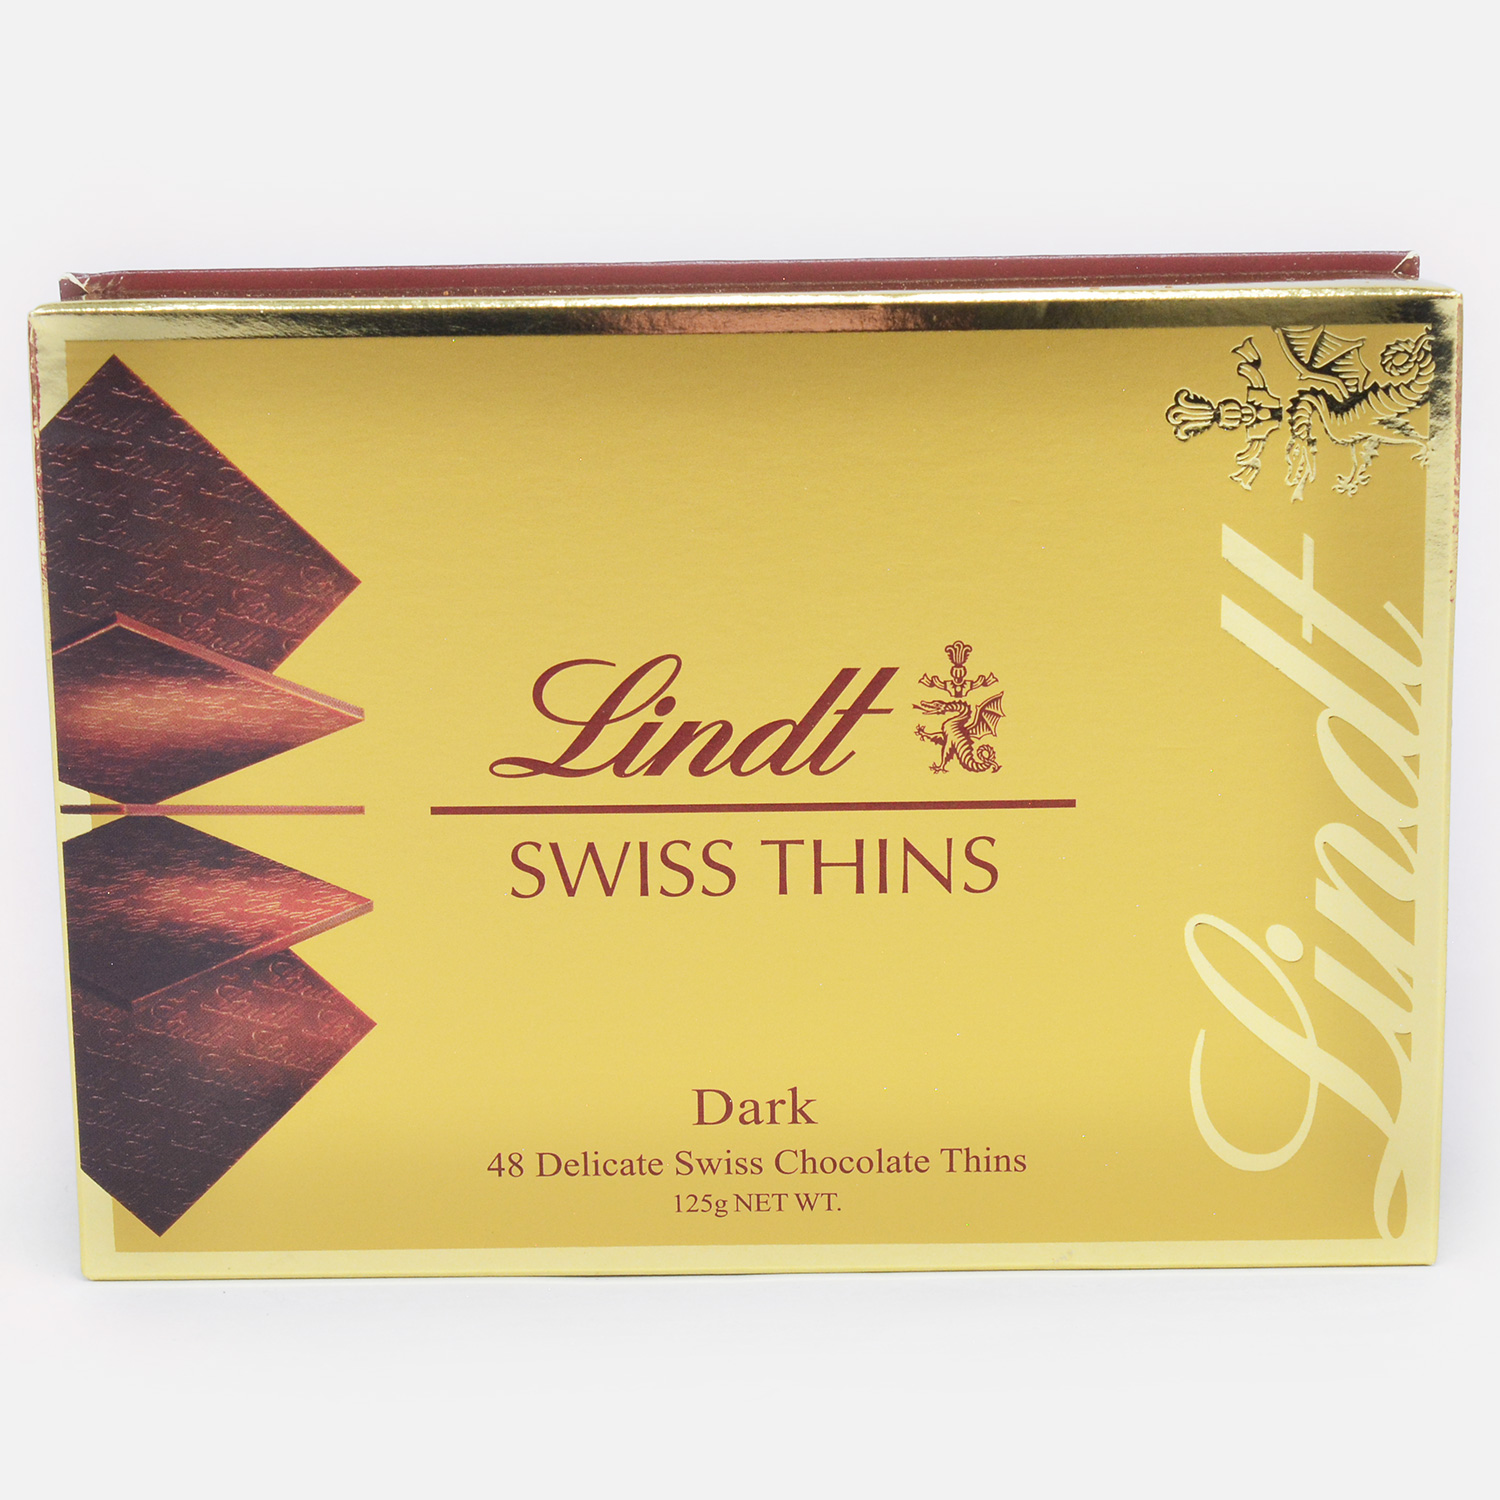 Lindt Swiss Thins 48 Delicate Dark Swiss Chocolate Thins